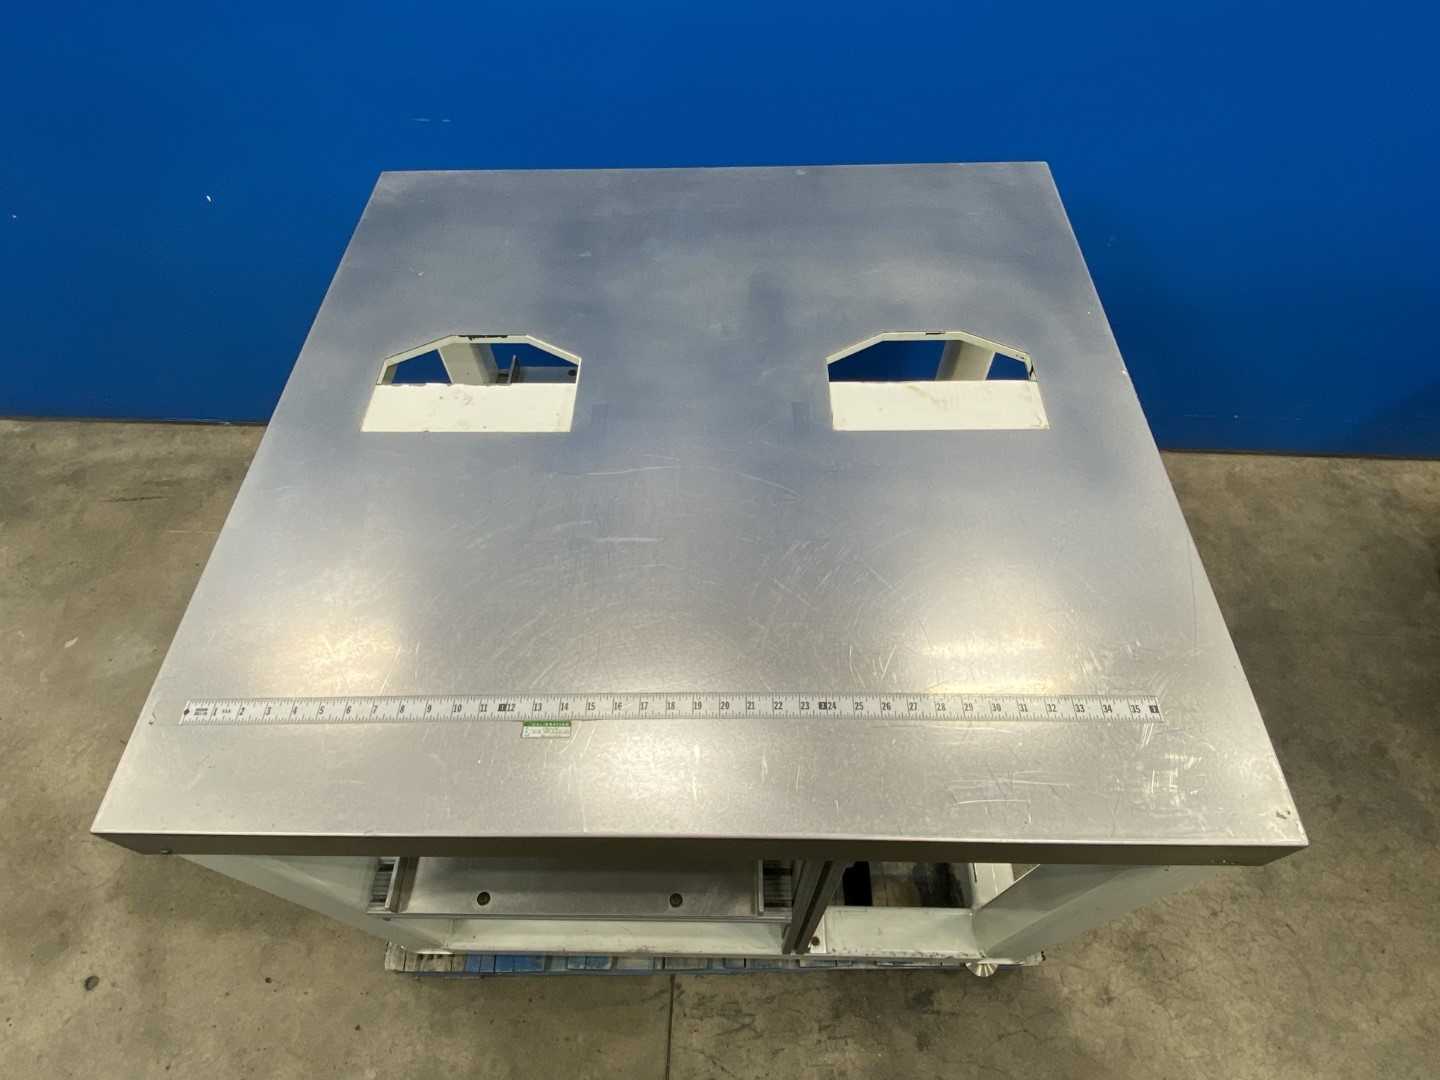 Stainless Steel Work Table 